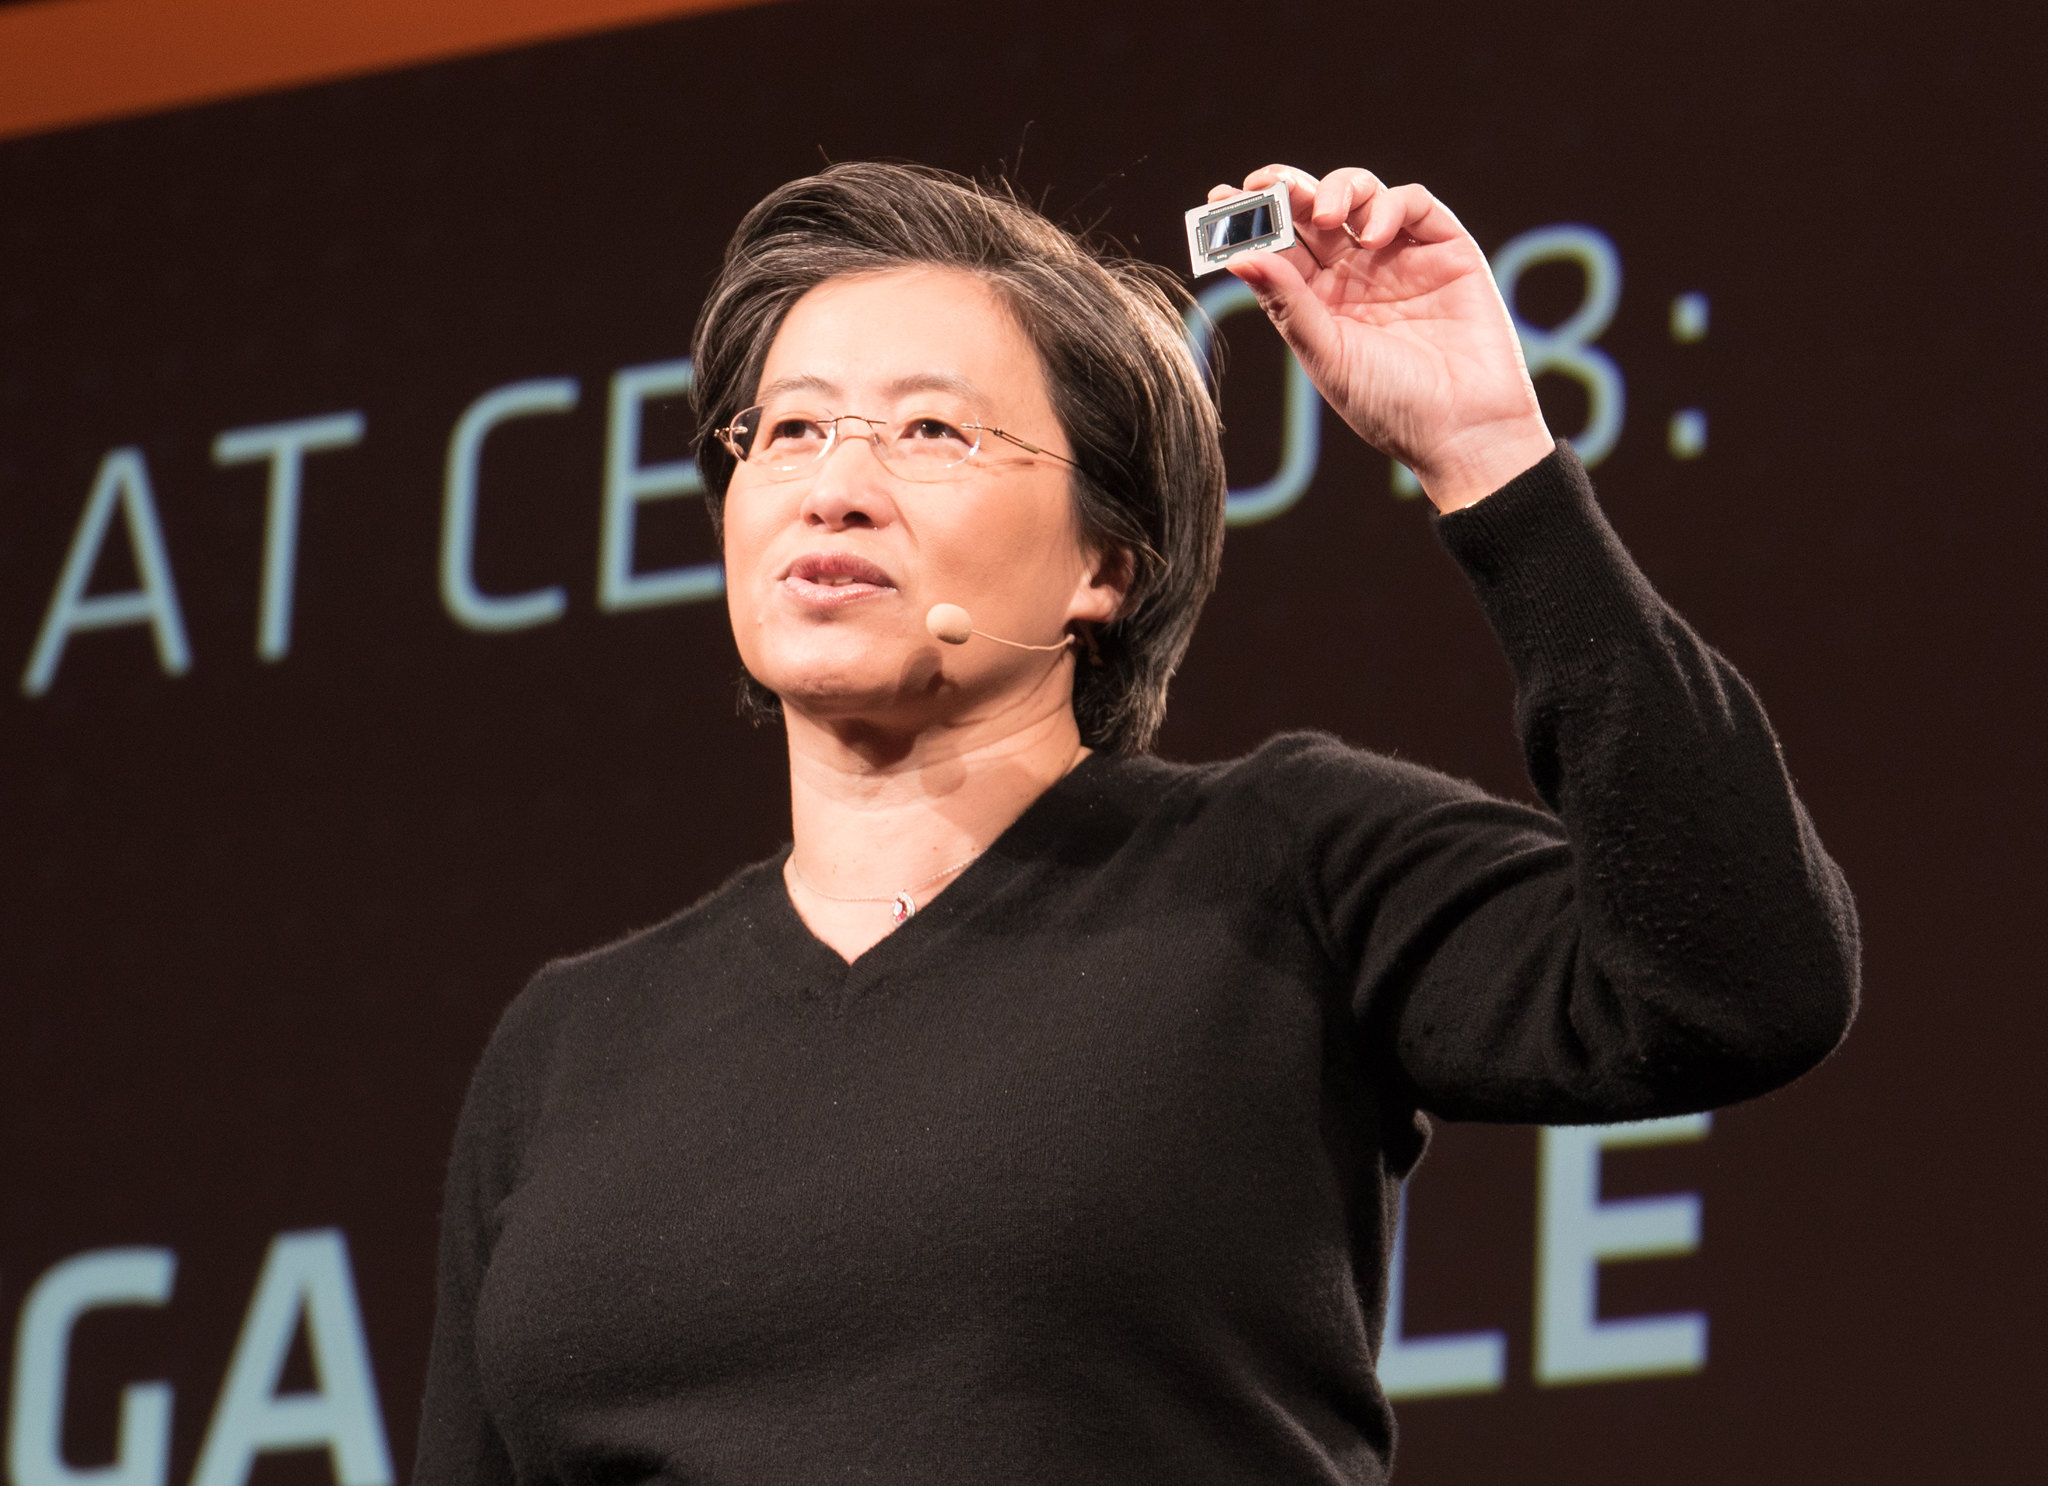 AMD grows its revenue by 71%, brushing aside concerns of a semiconductor slowdown